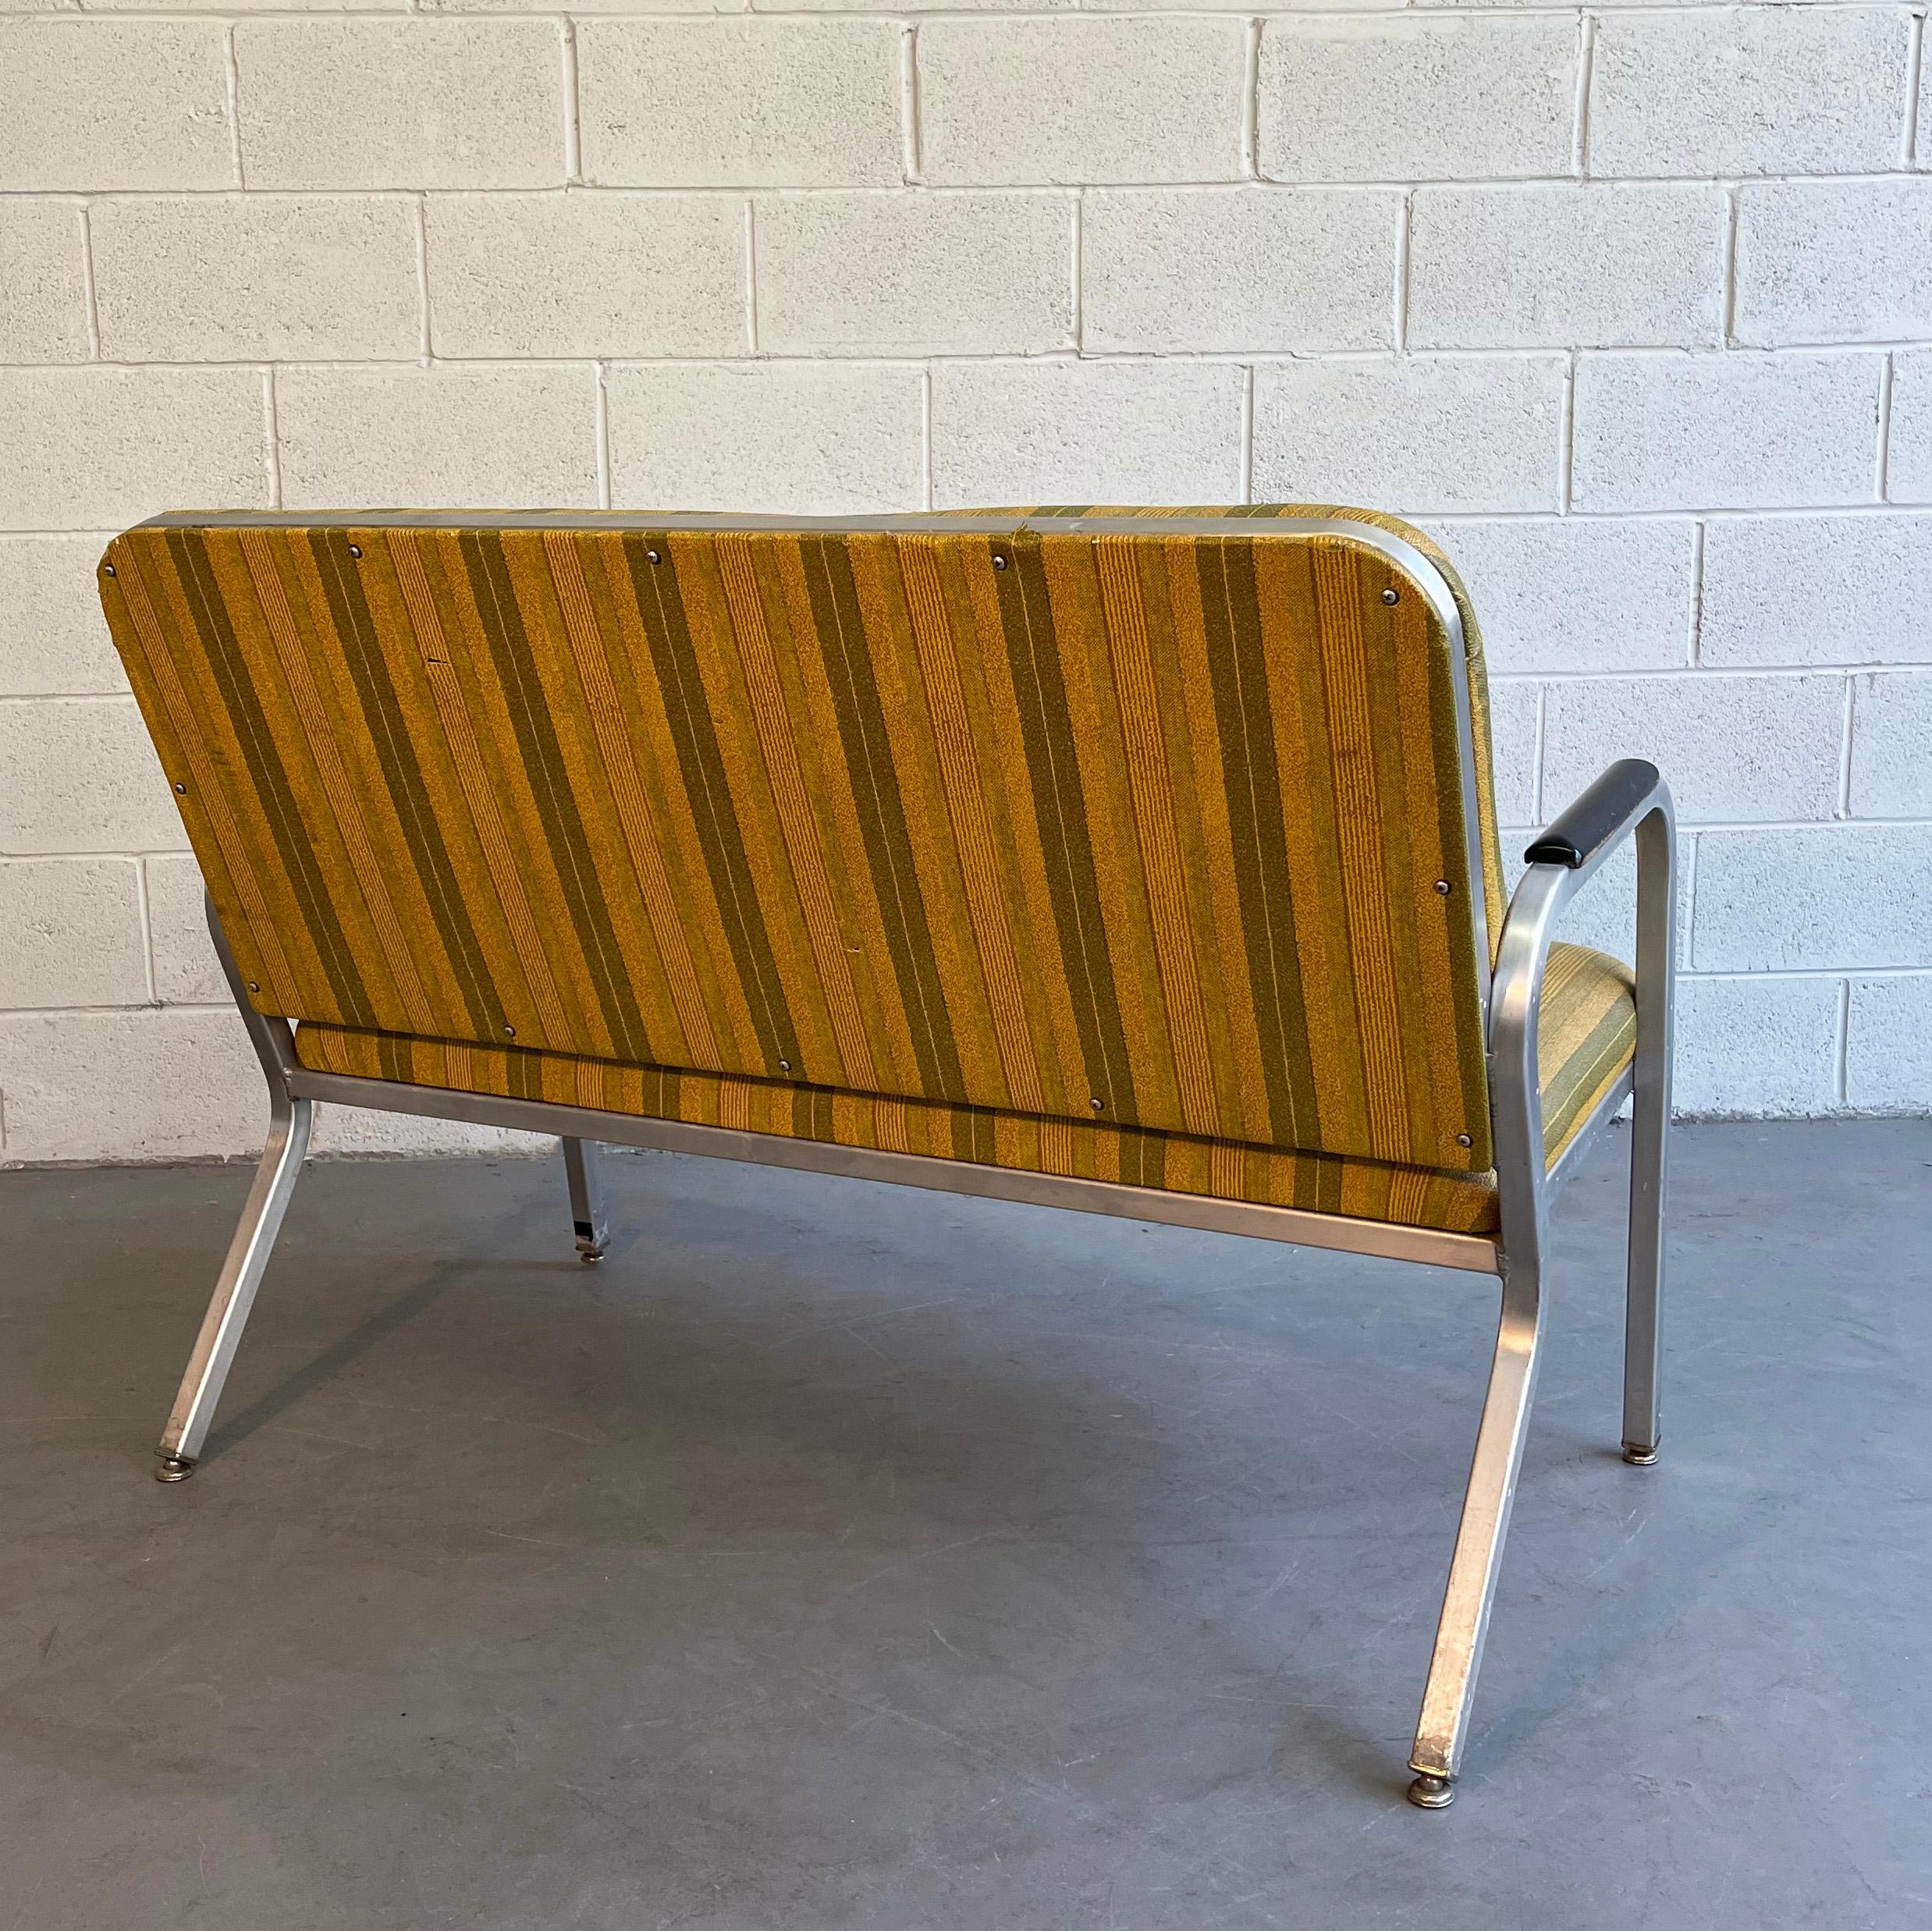 Midcentury Aluminum Frame Loveseat Sofa by GoodForm In Good Condition For Sale In Brooklyn, NY